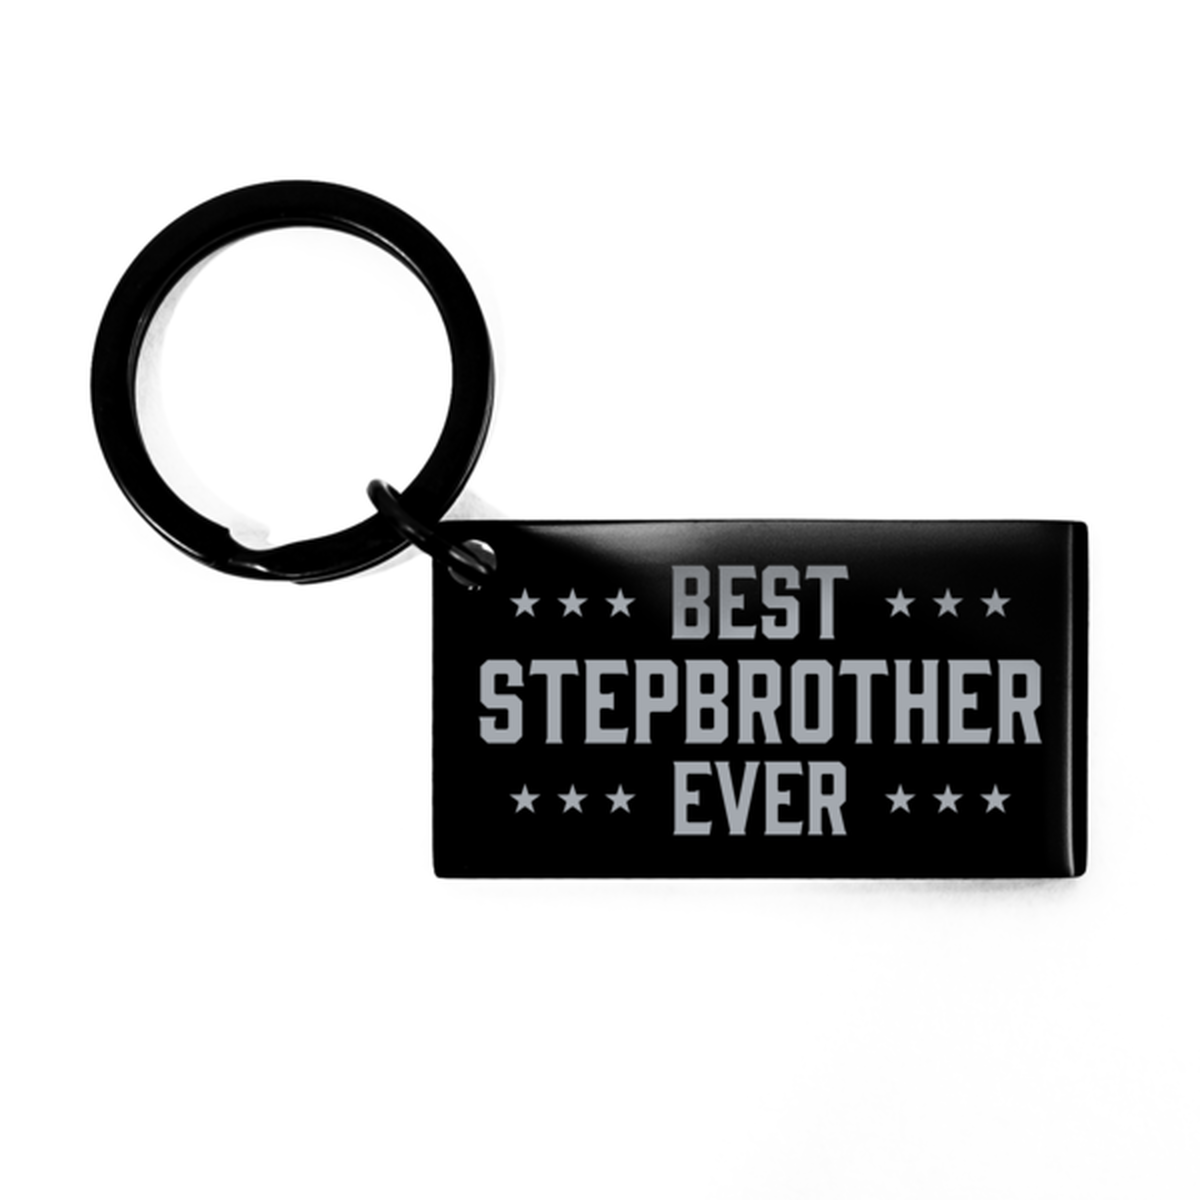 Best Stepbrother Ever Stepbrother Gifts, Funny Black Keychain For Stepbrother, Birthday Engraved Keyring Presents For Men